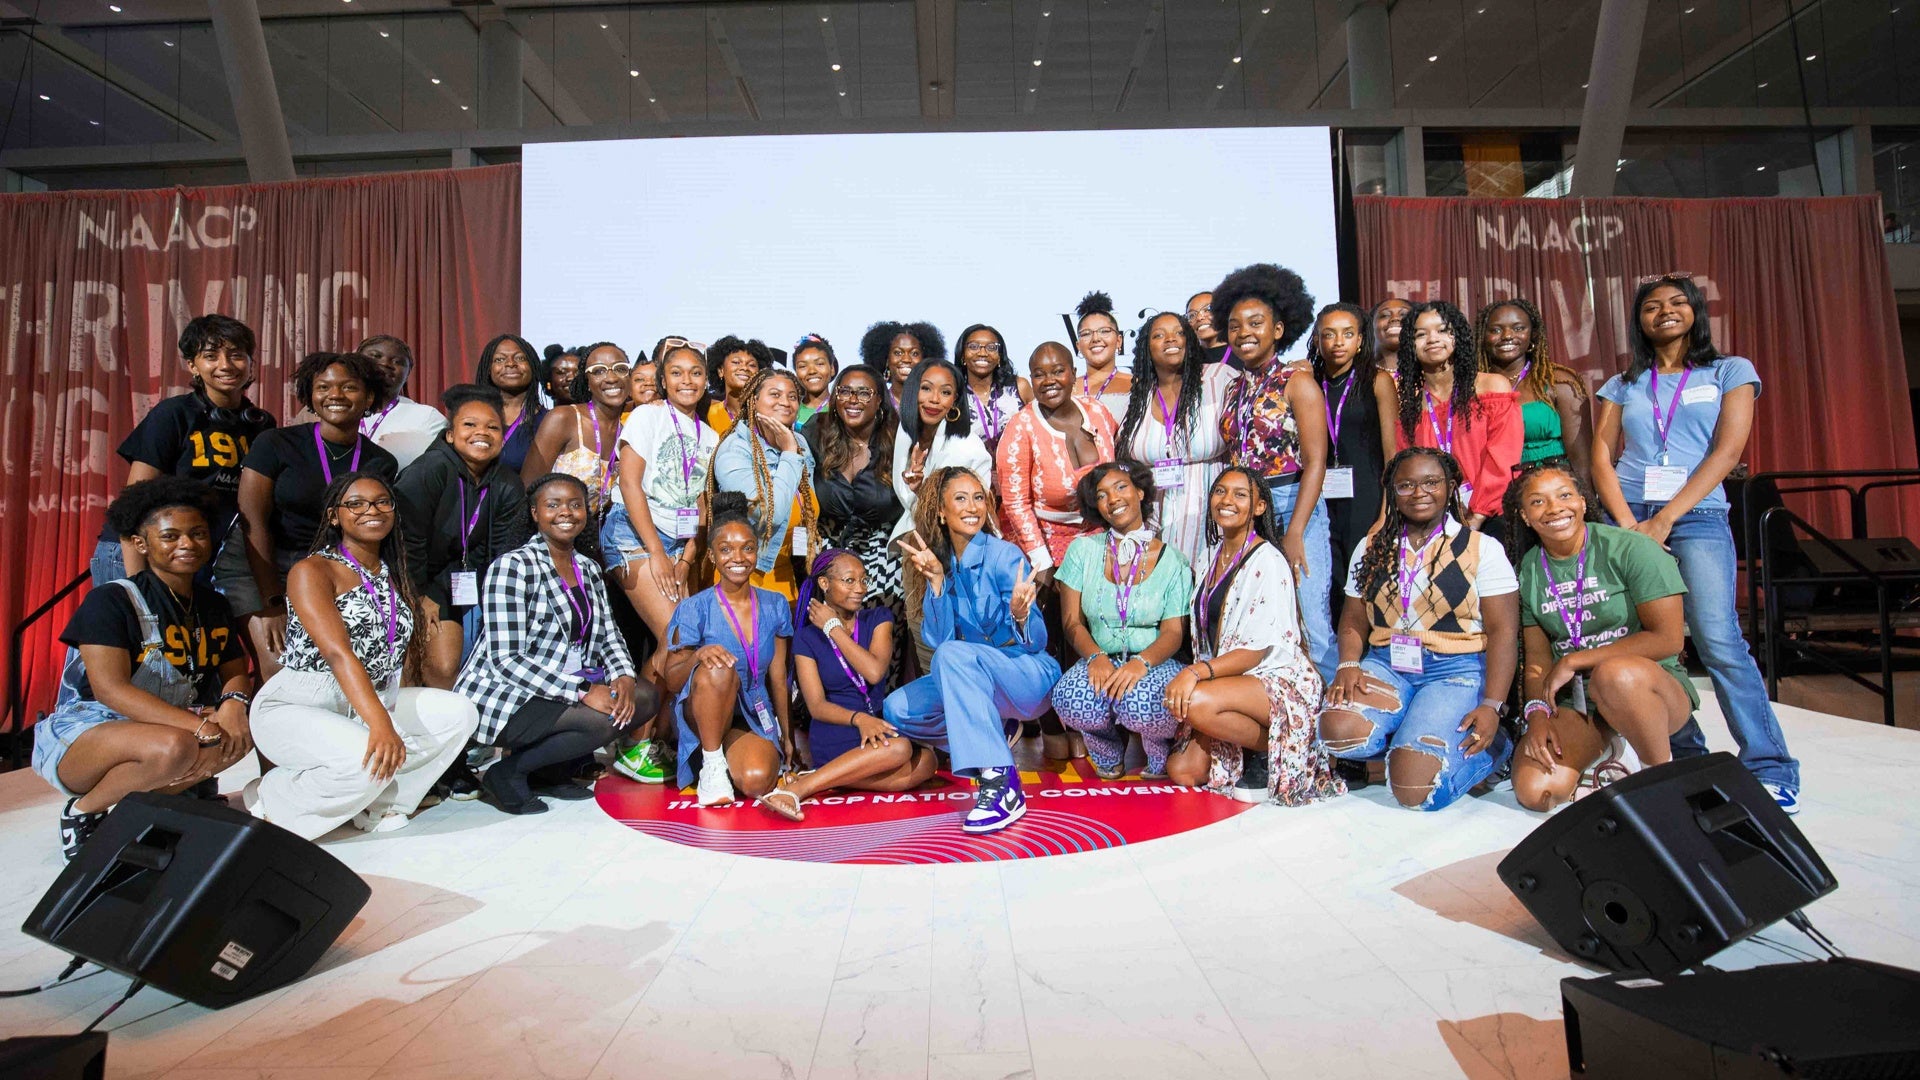 Lancôme & NAACP Celebrates Second Annual Write Your Future Scholarship Fund